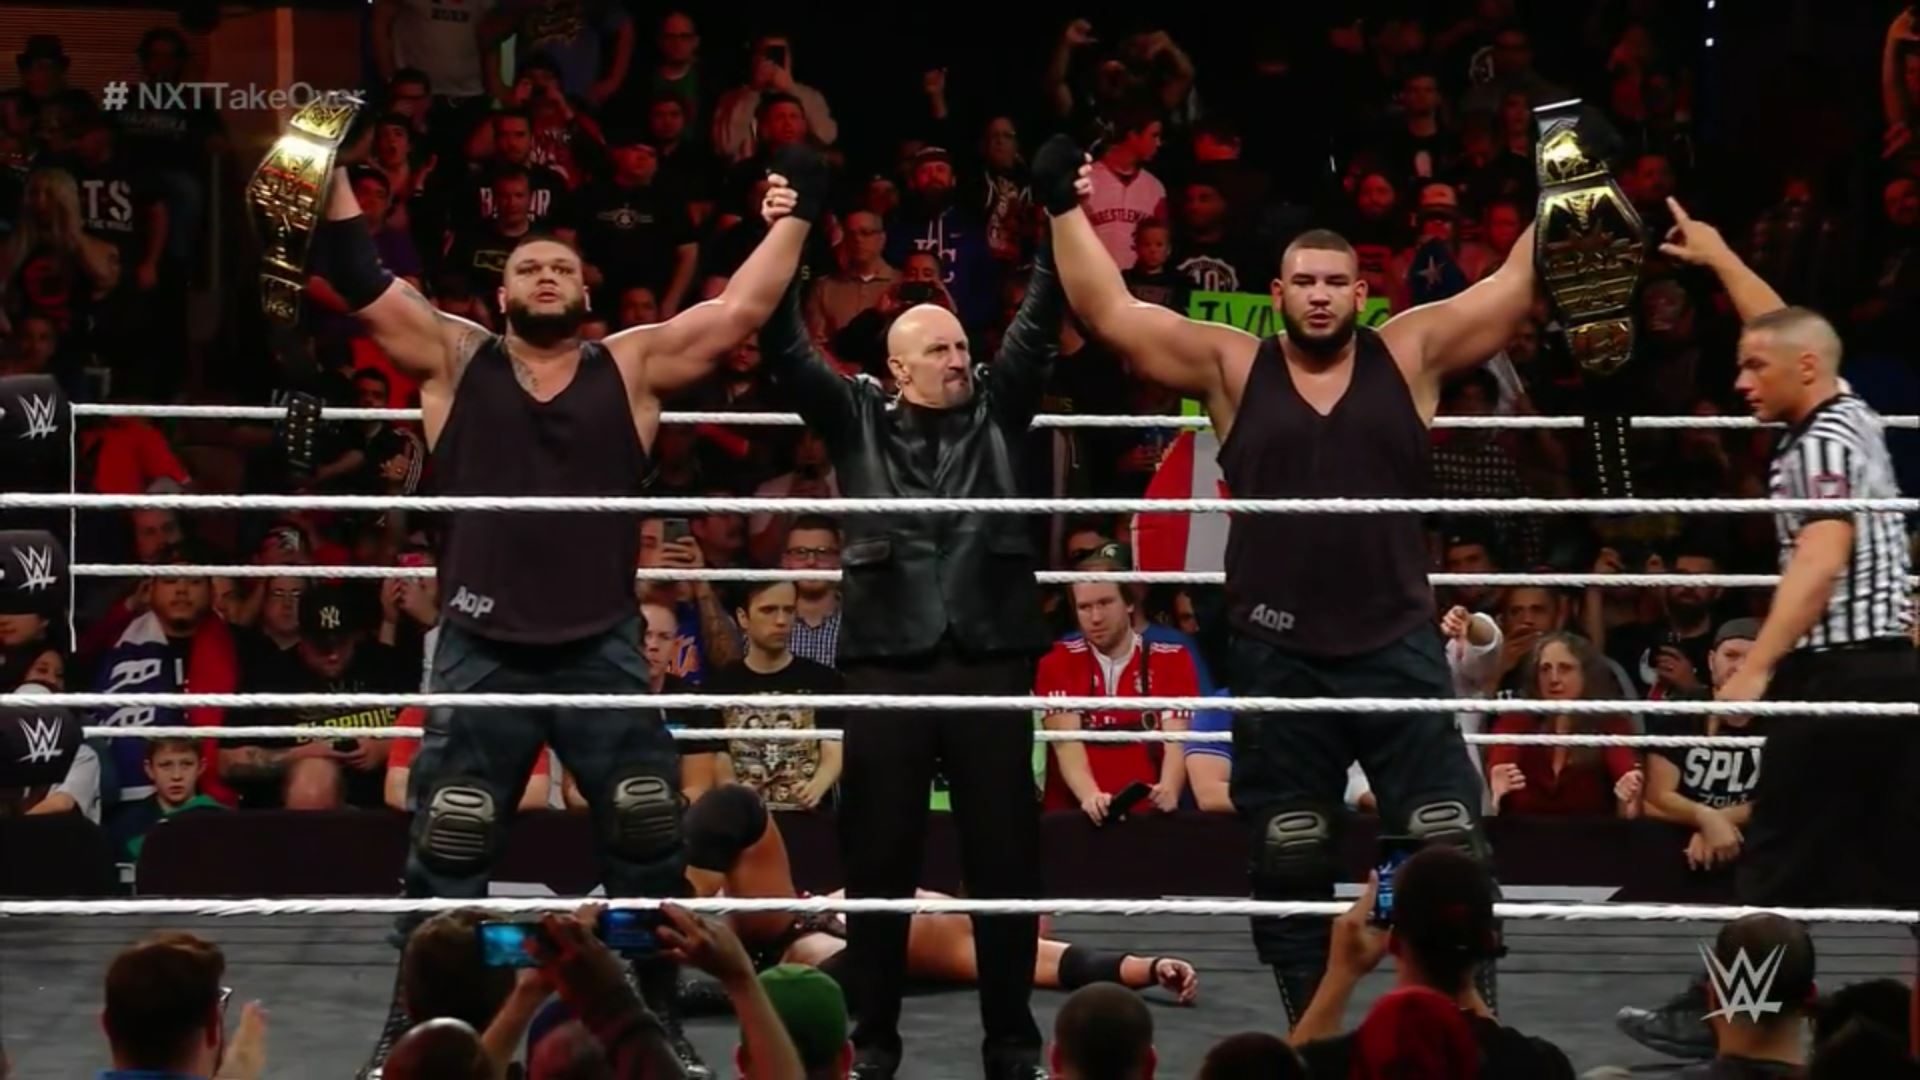 aop nxt takeover champions